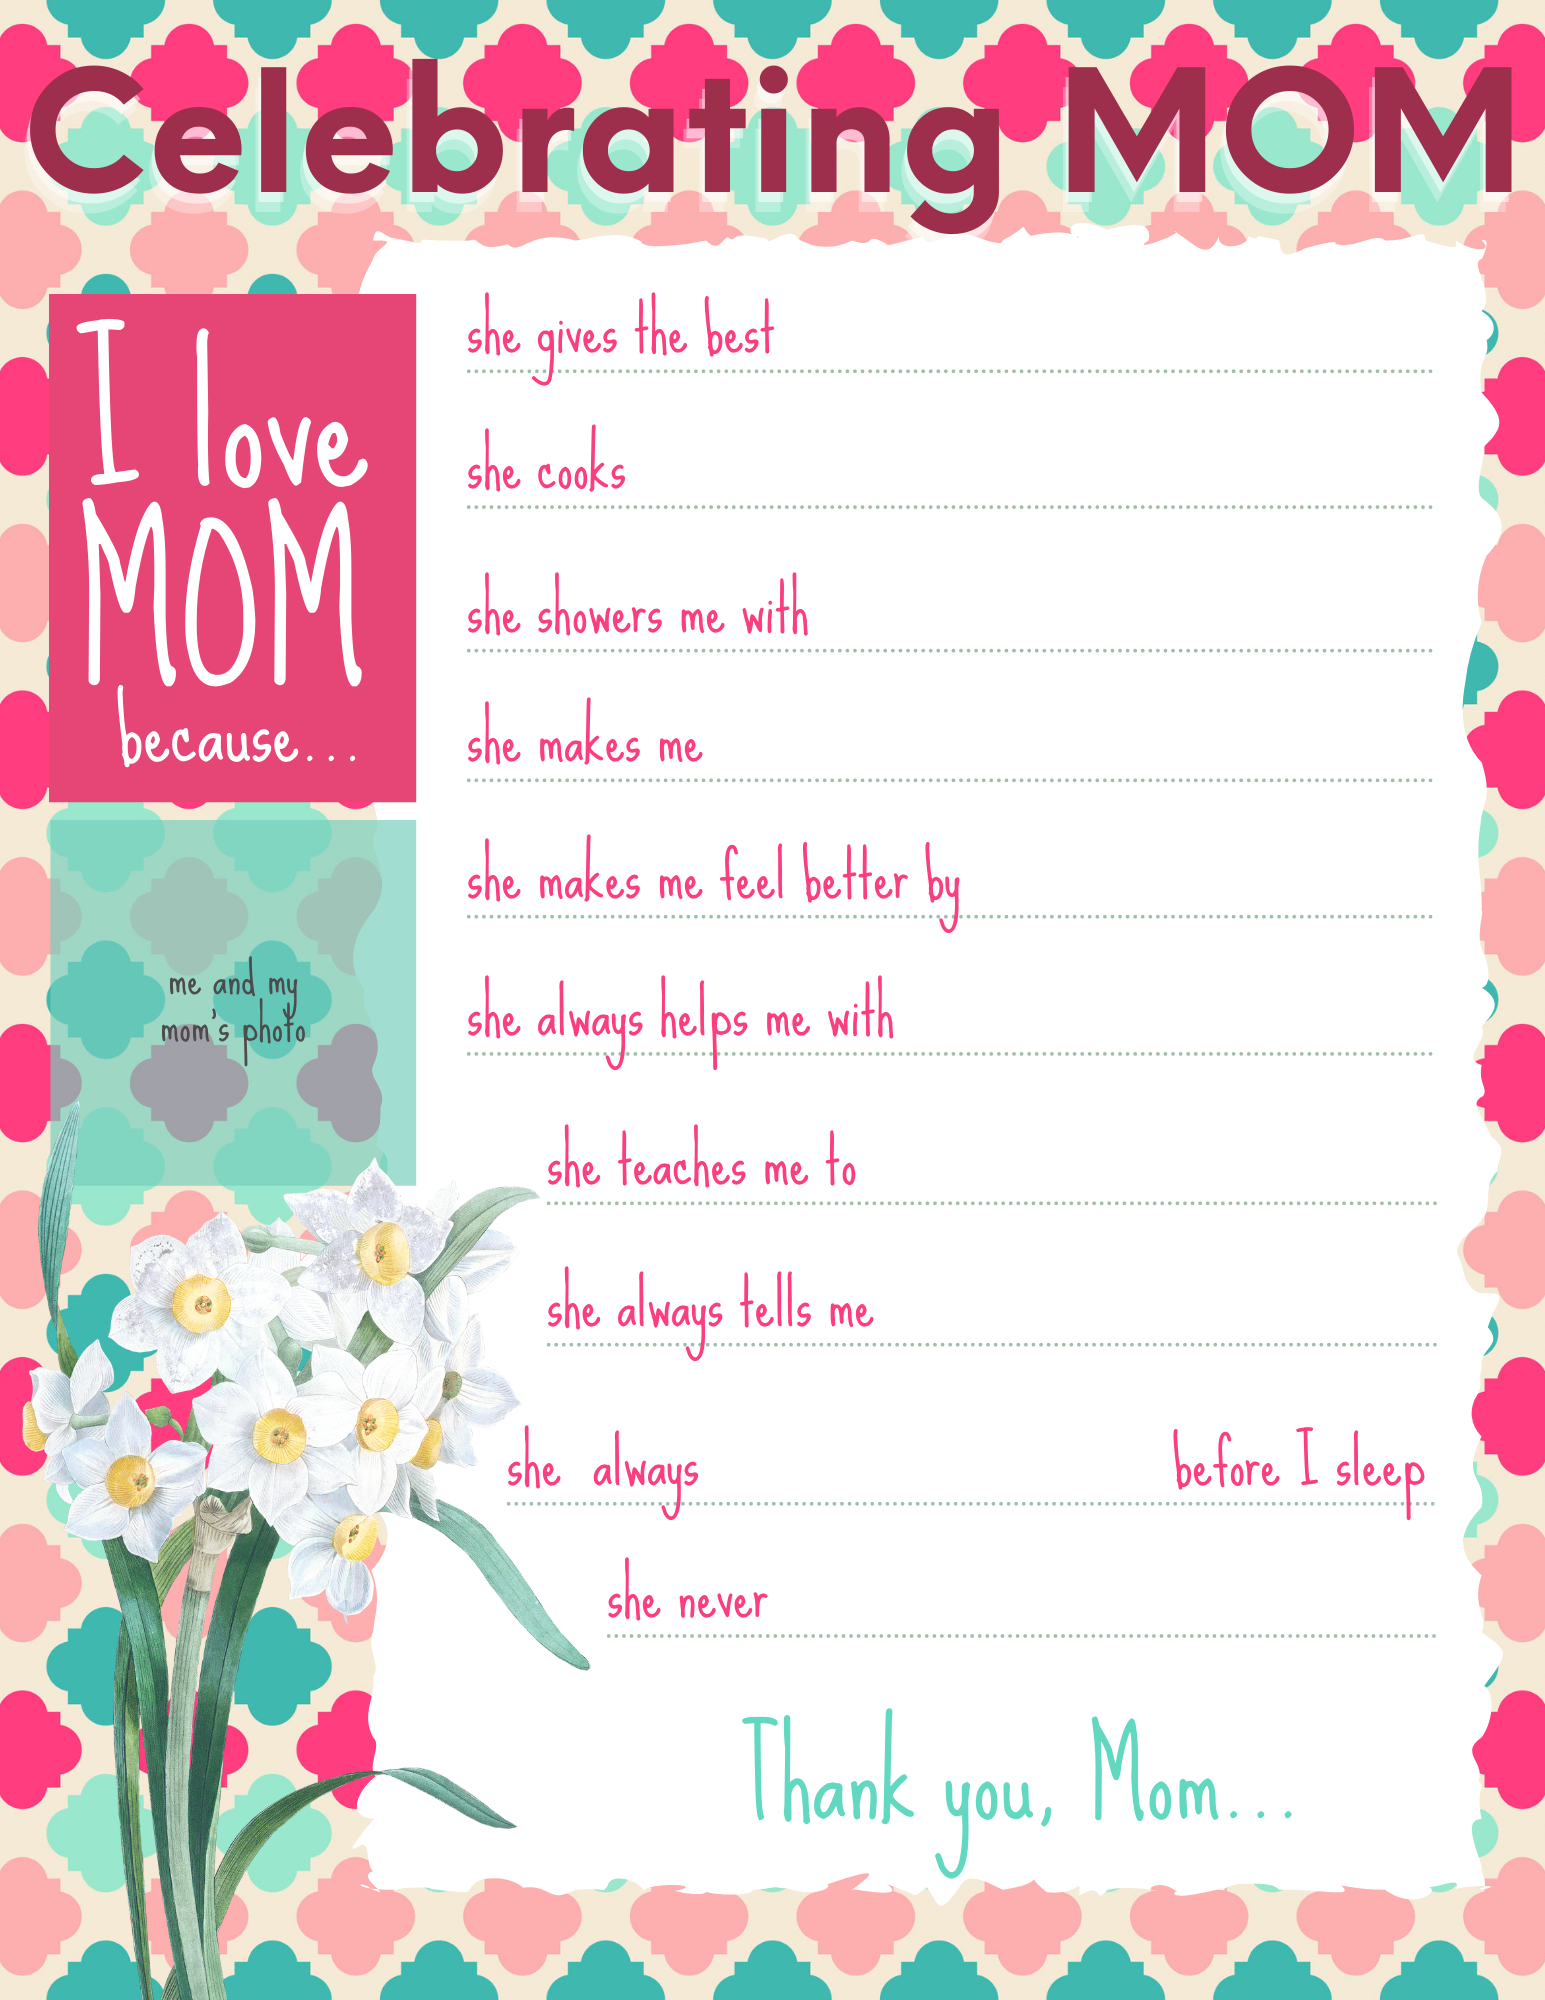 https://www.thriftymommastips.com/wp-content/uploads/2021/02/Copy-of-I-love-mom-because.png